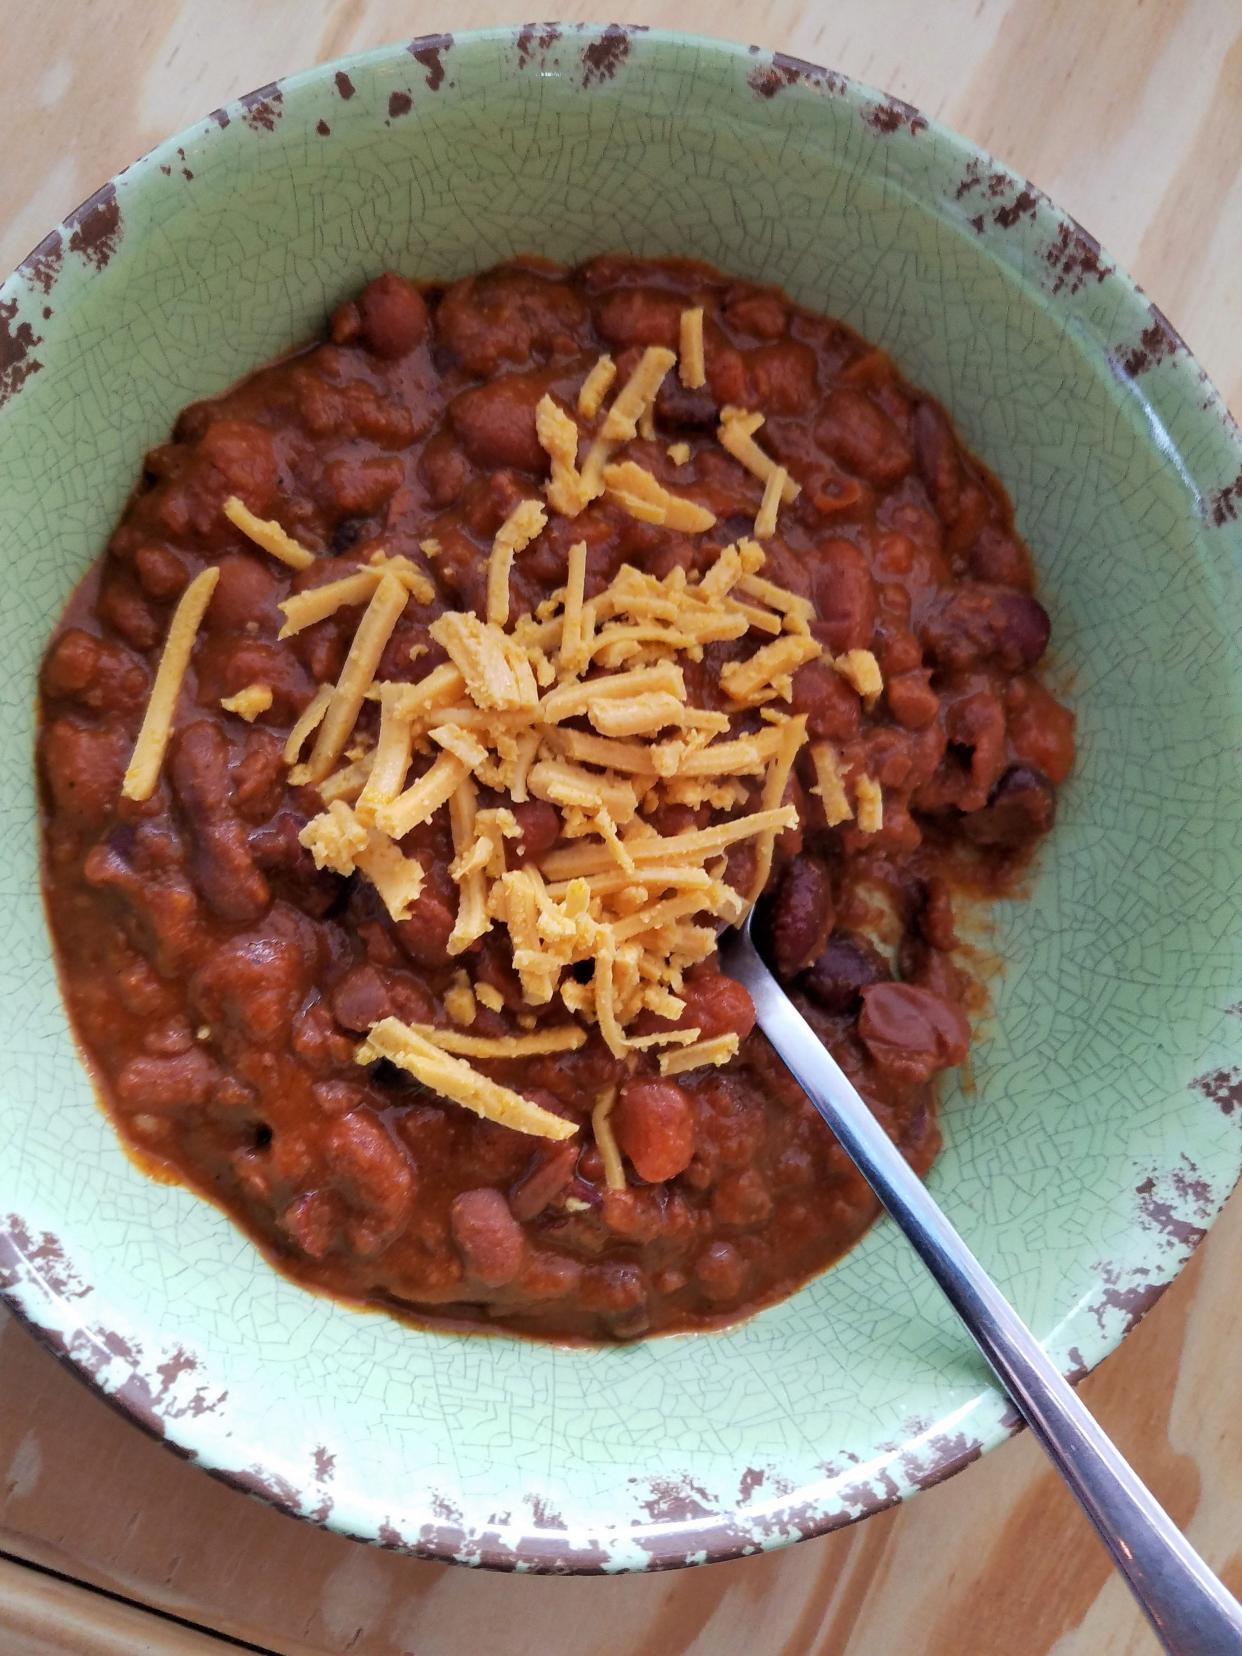 Fall is chili season. Watch for chili contests and cook-offs coming your way.